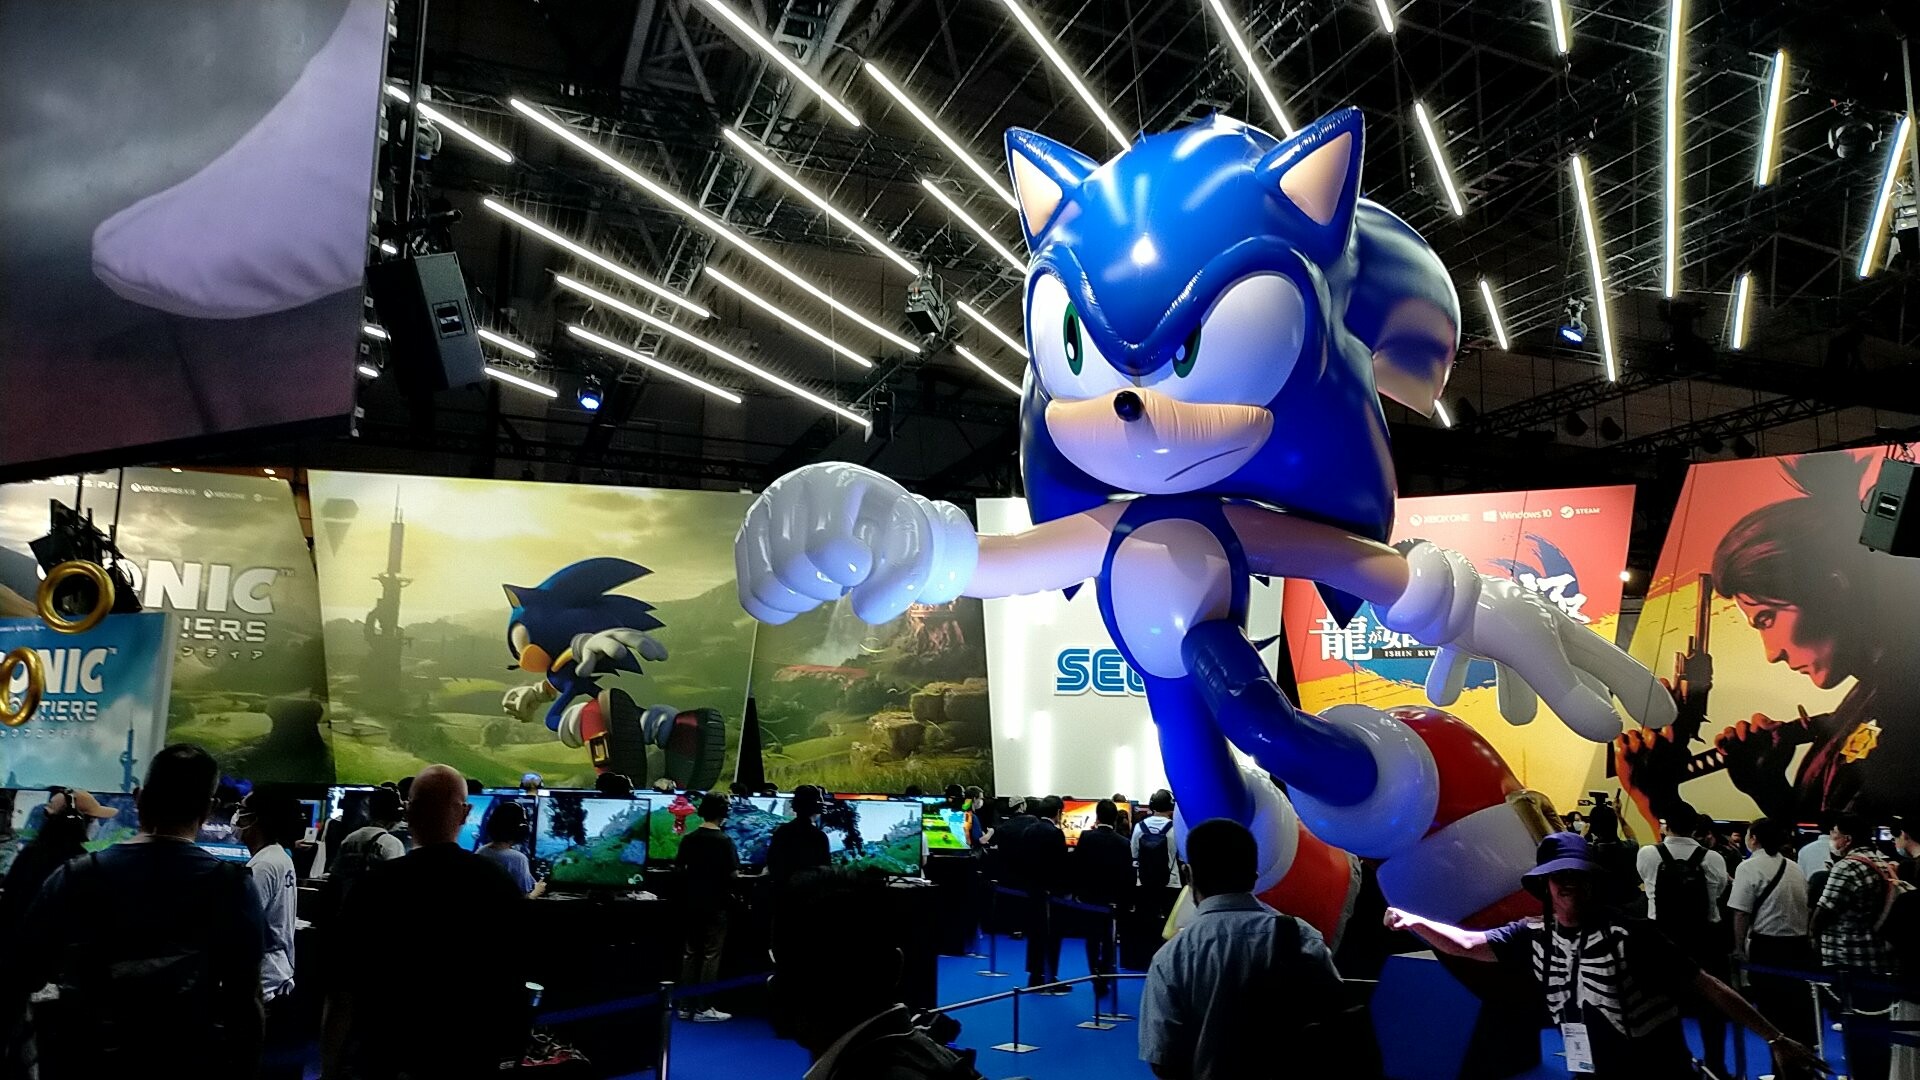 FFXVI, Sonic Frontiers, Wo Long take Japan Game Awards at TGS 2022